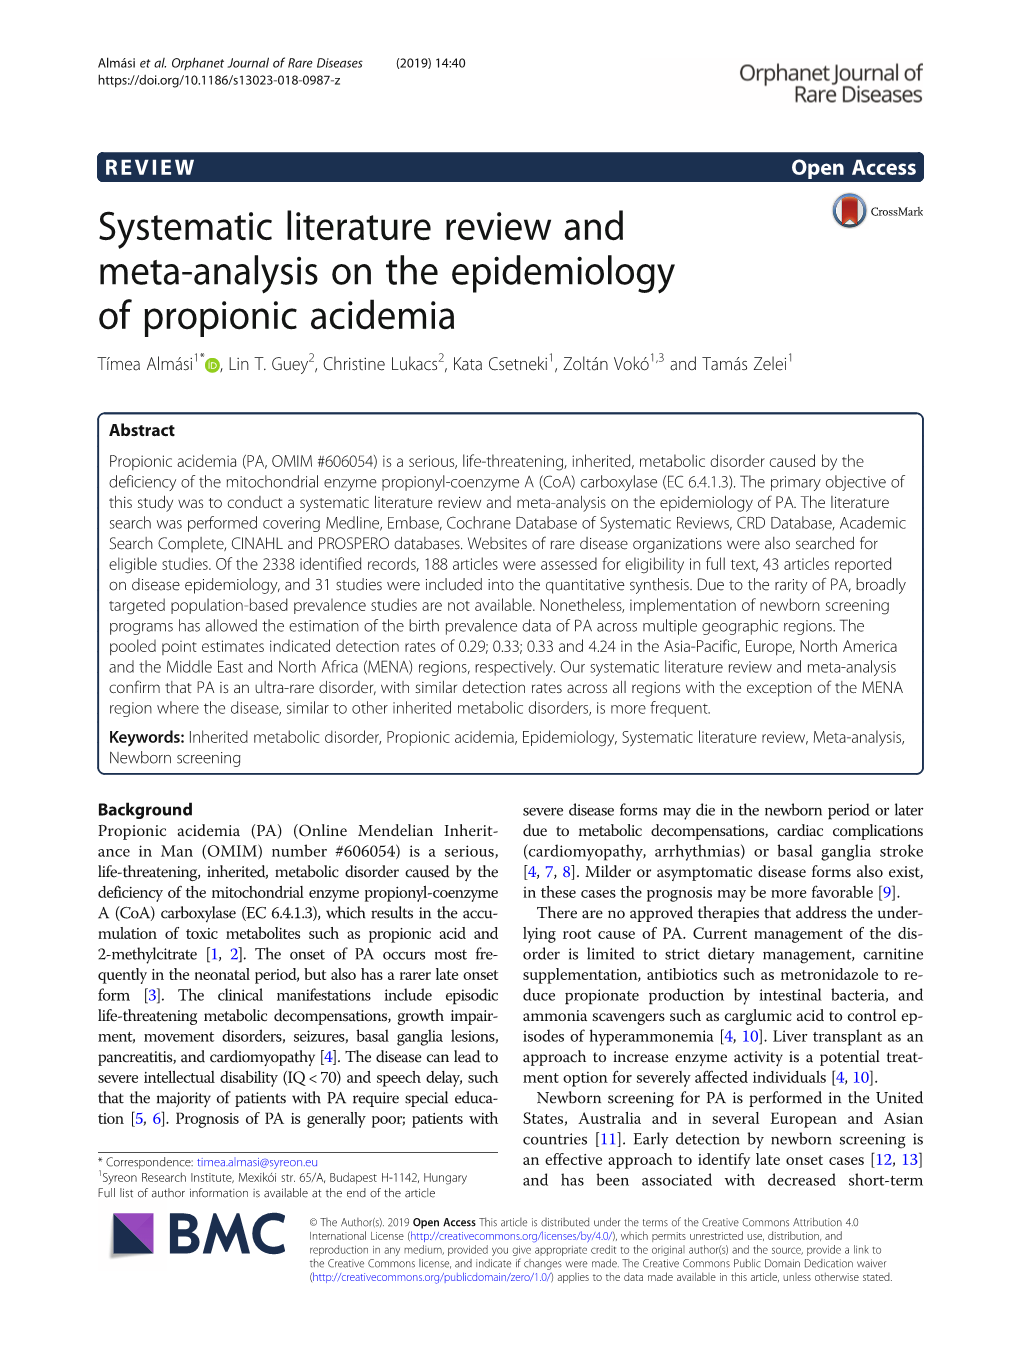 Systematic Literature Review and Meta-Analysis on the Epidemiology of Propionic Acidemia Tímea Almási1* , Lin T